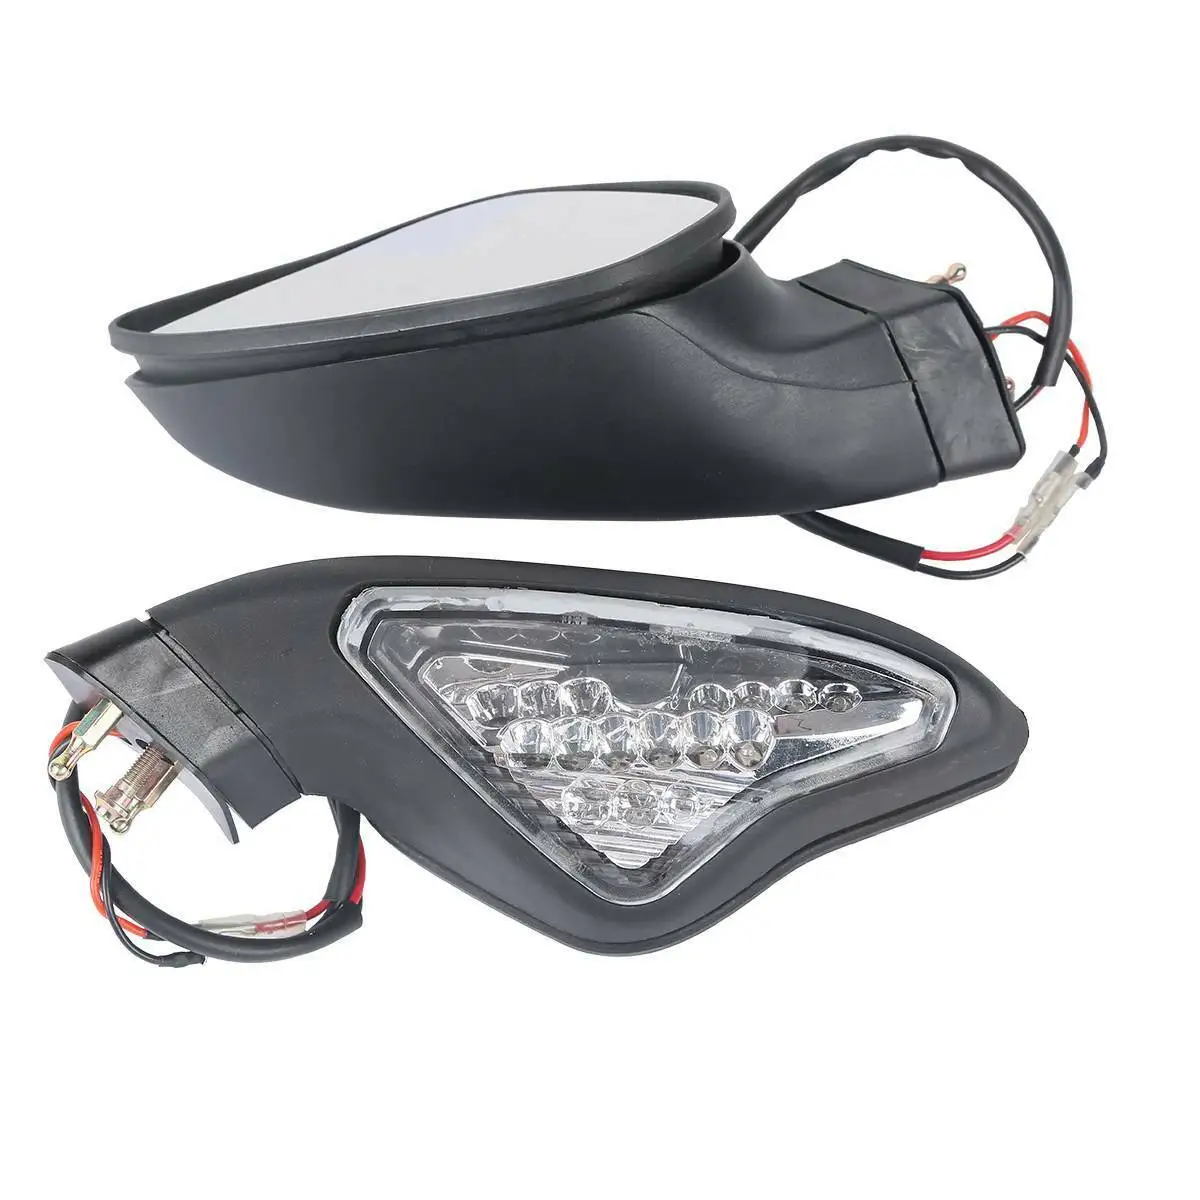 Motorcycle Black Rearview Mirror Turn Signal For Ducati 848 1098 1098S  1098R 1198 1198S|Side Mirrors  Accessories| - AliExpress